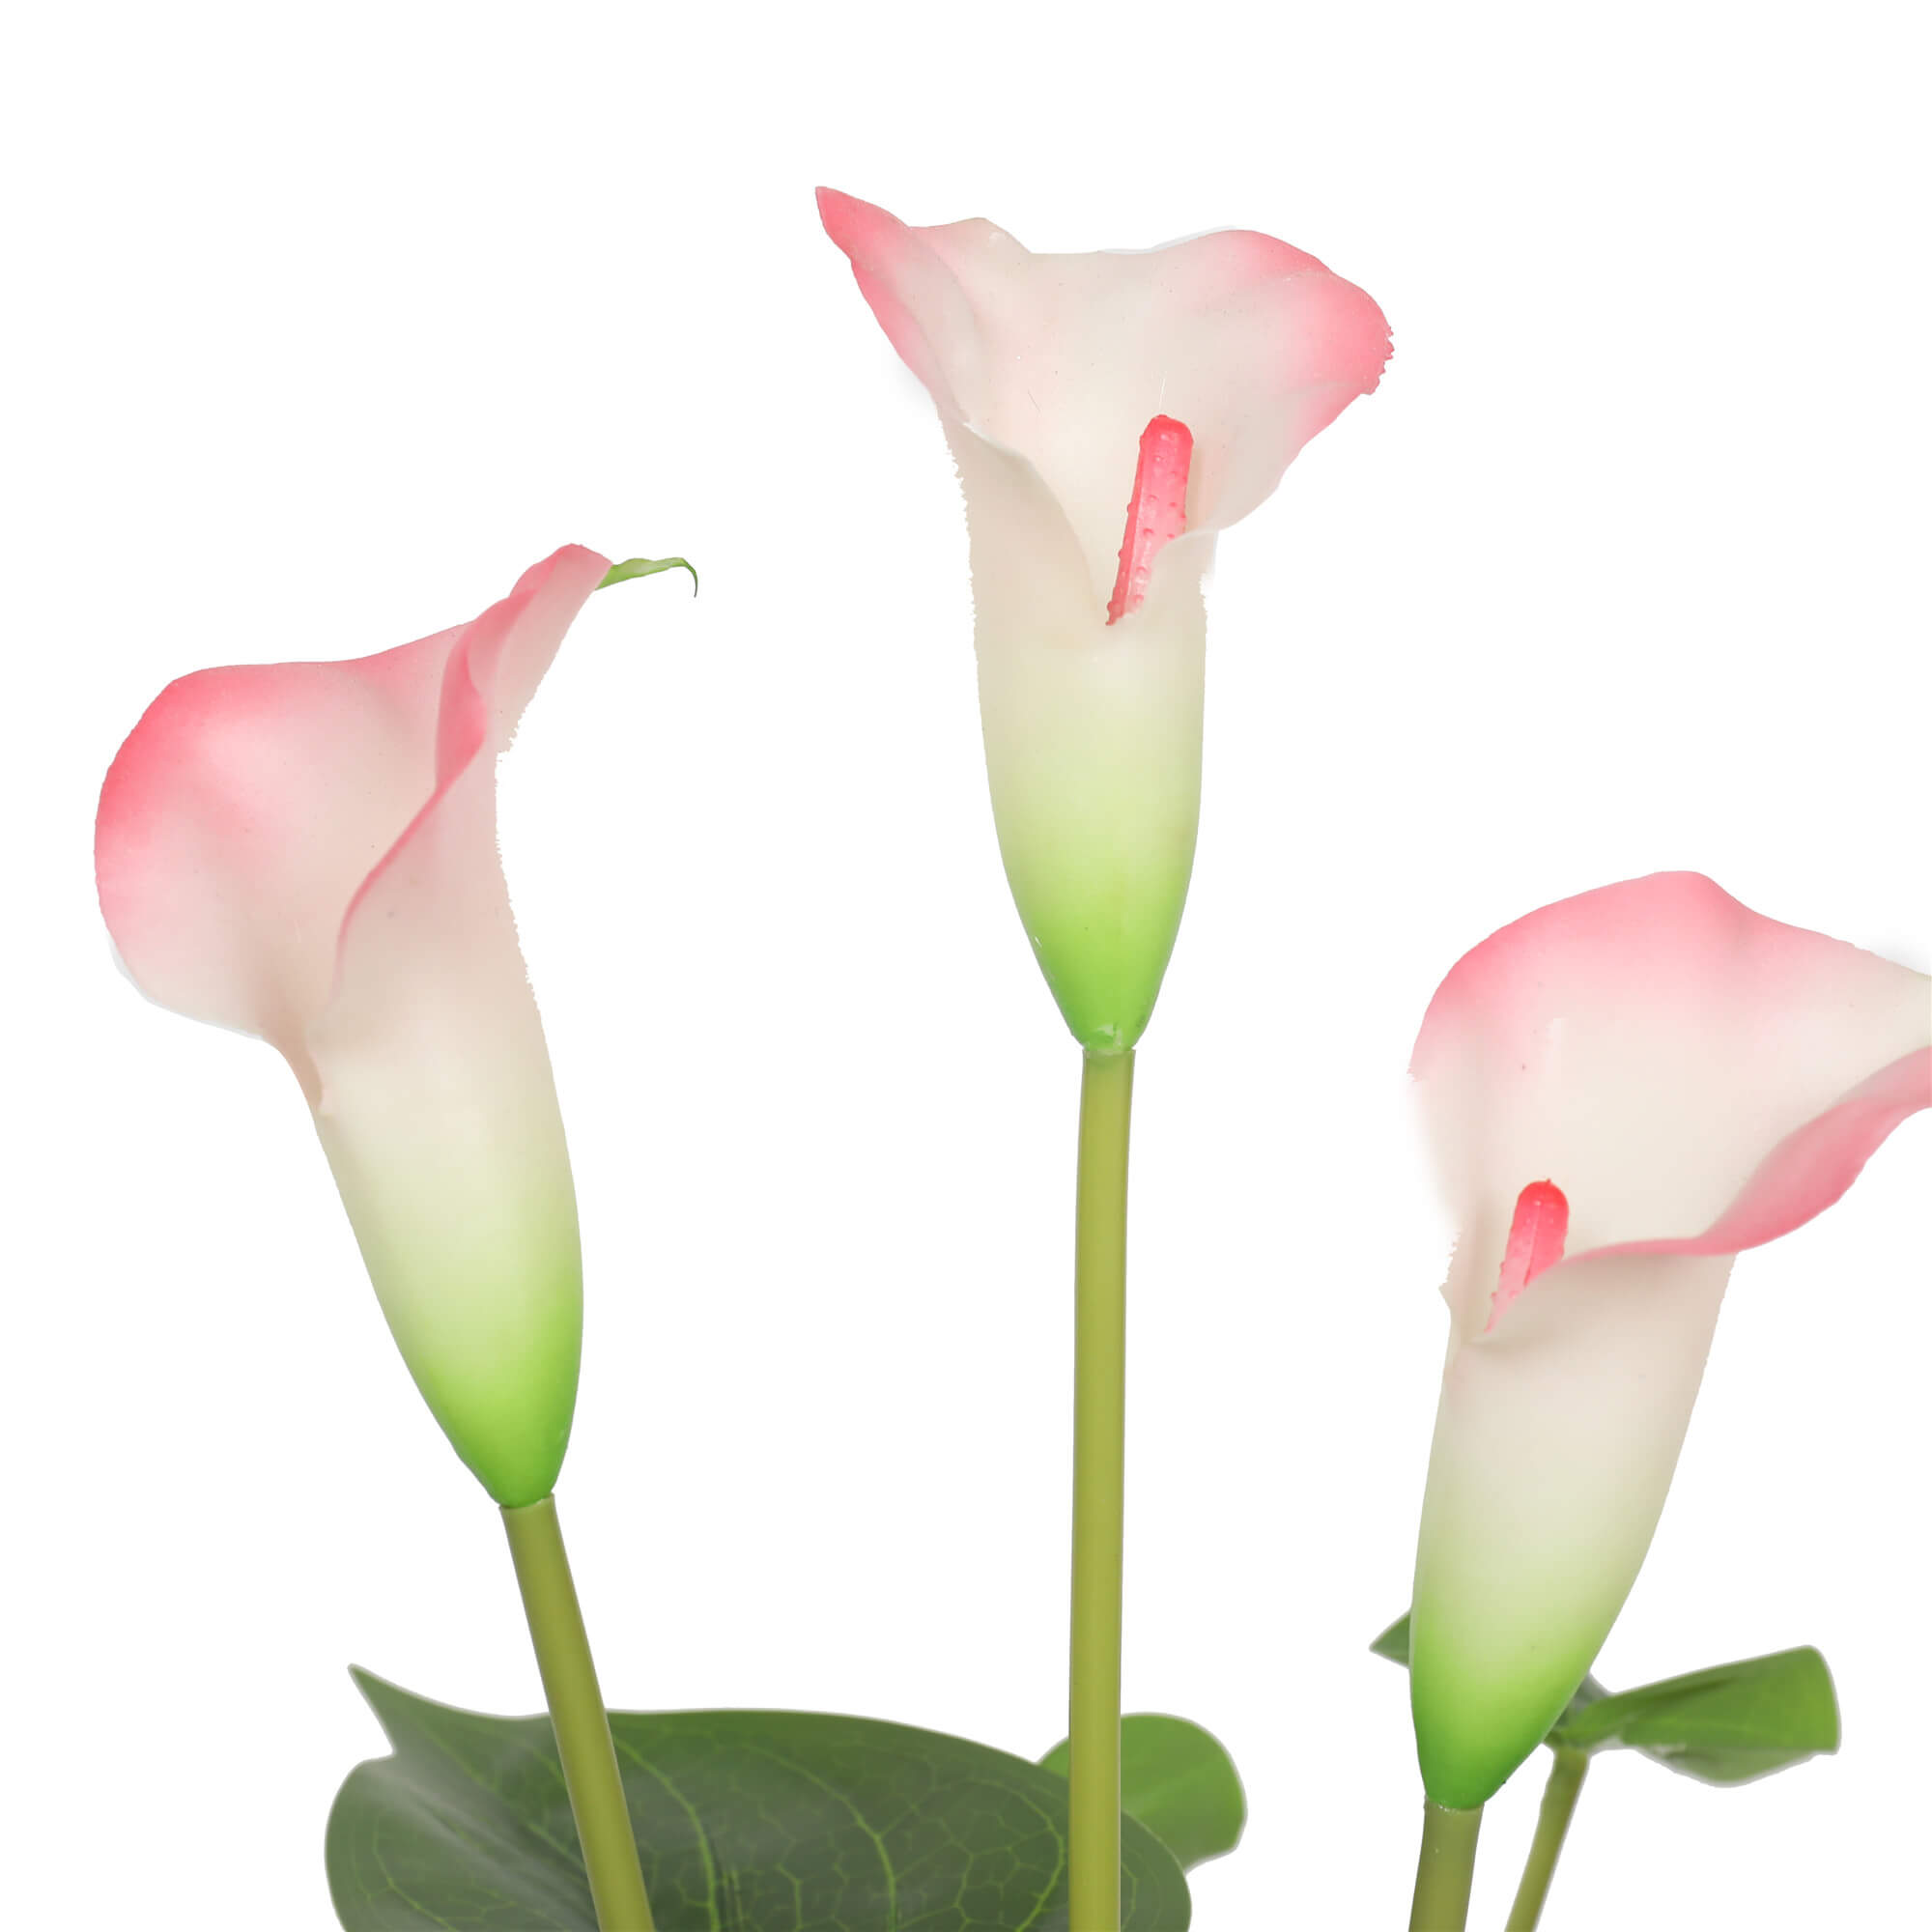  Artificial Flower Plants Calla Lily Faux Small Potted